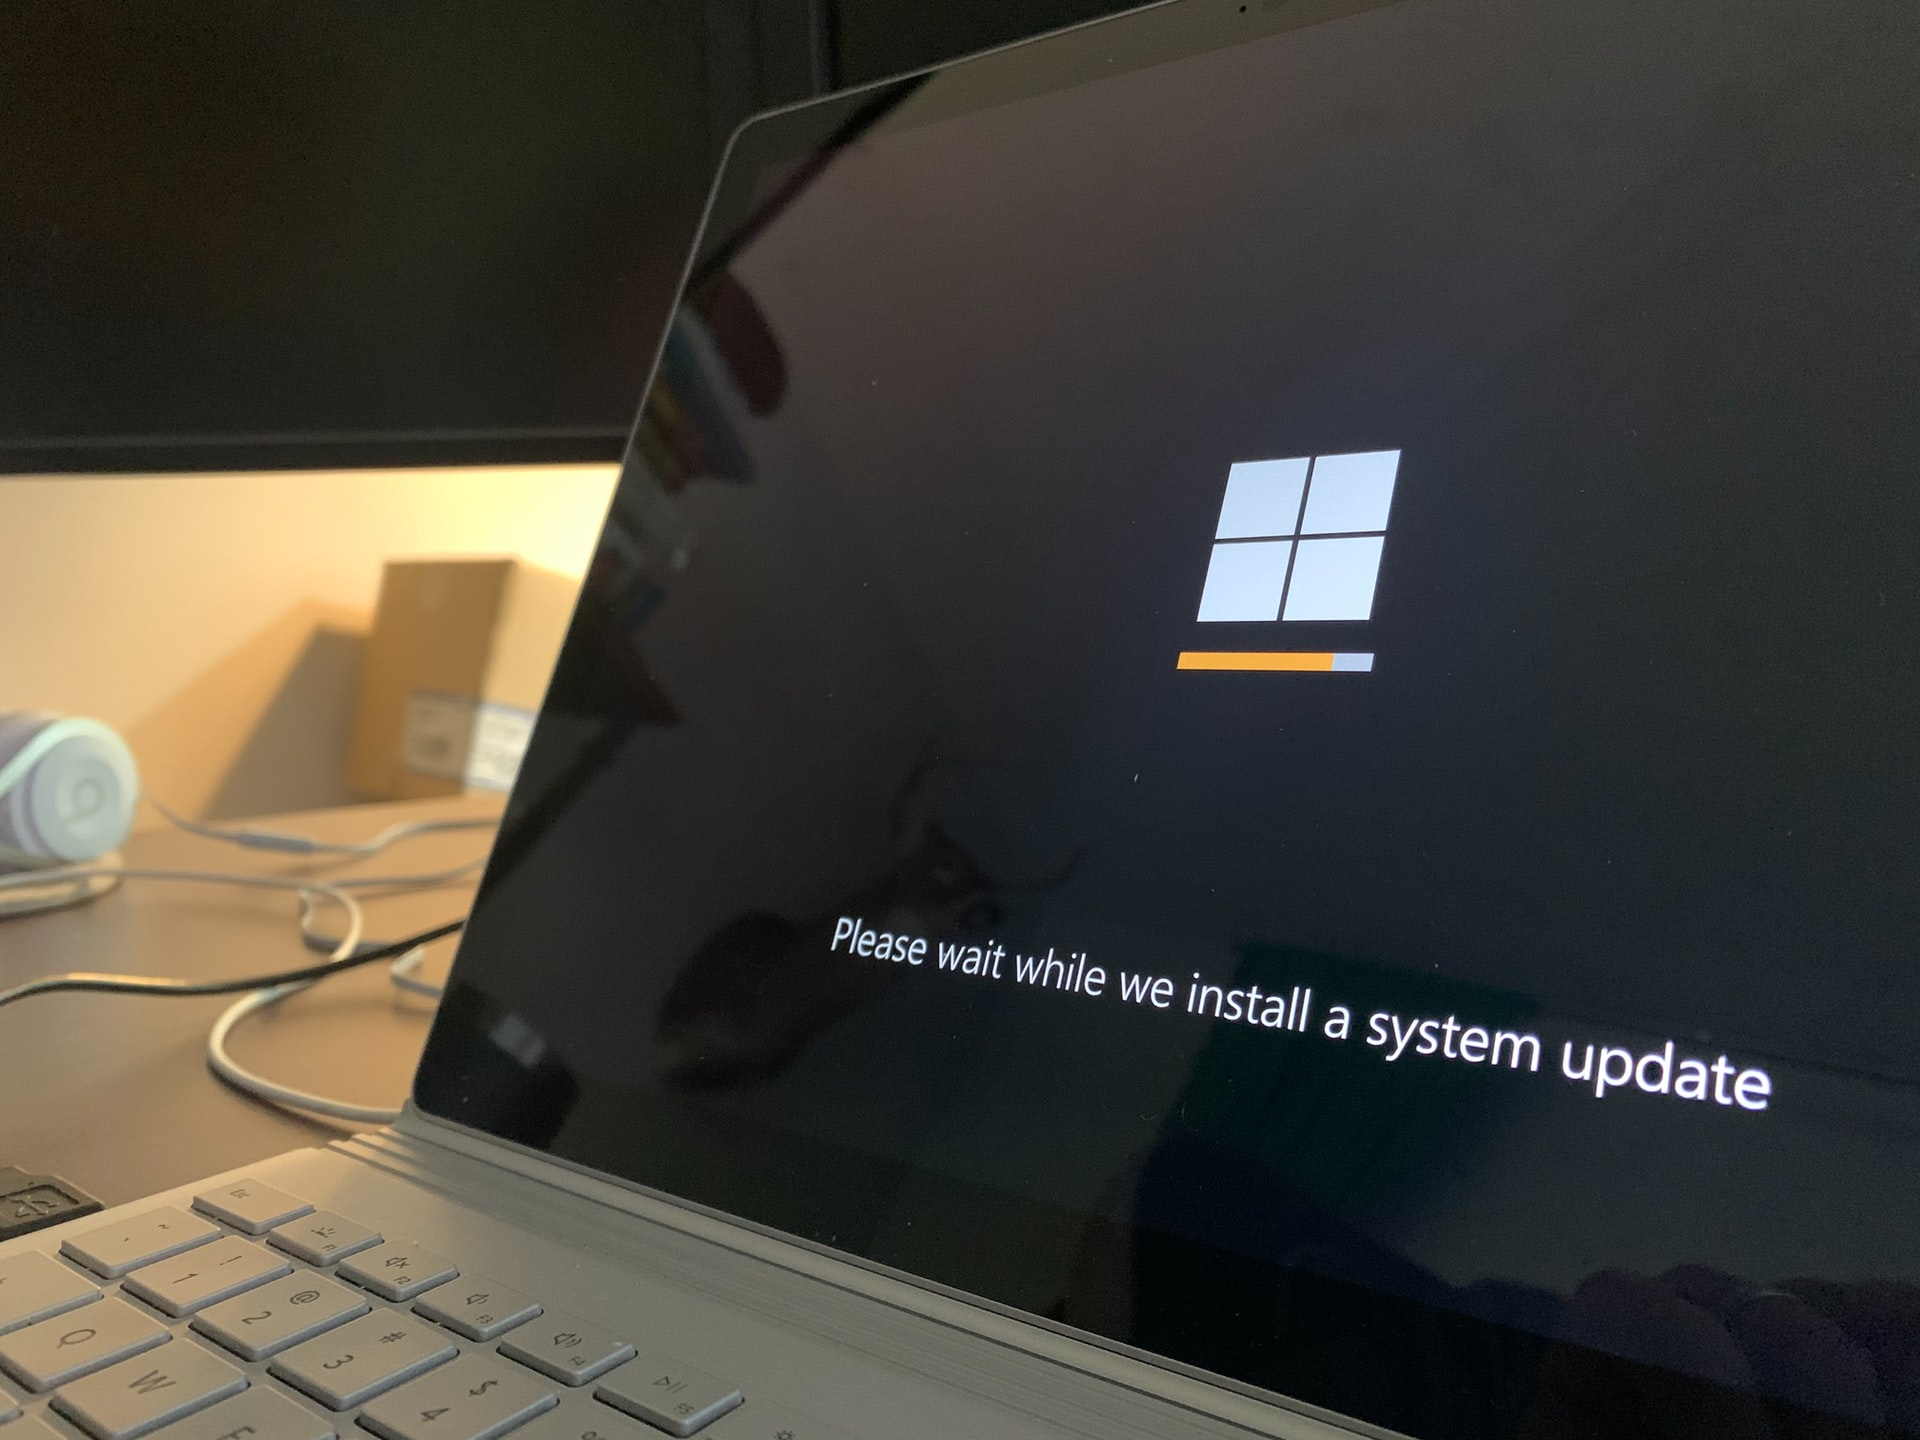 Not Windows 11 alone: Microsoft has released Windows 10 update 21H1 to all users